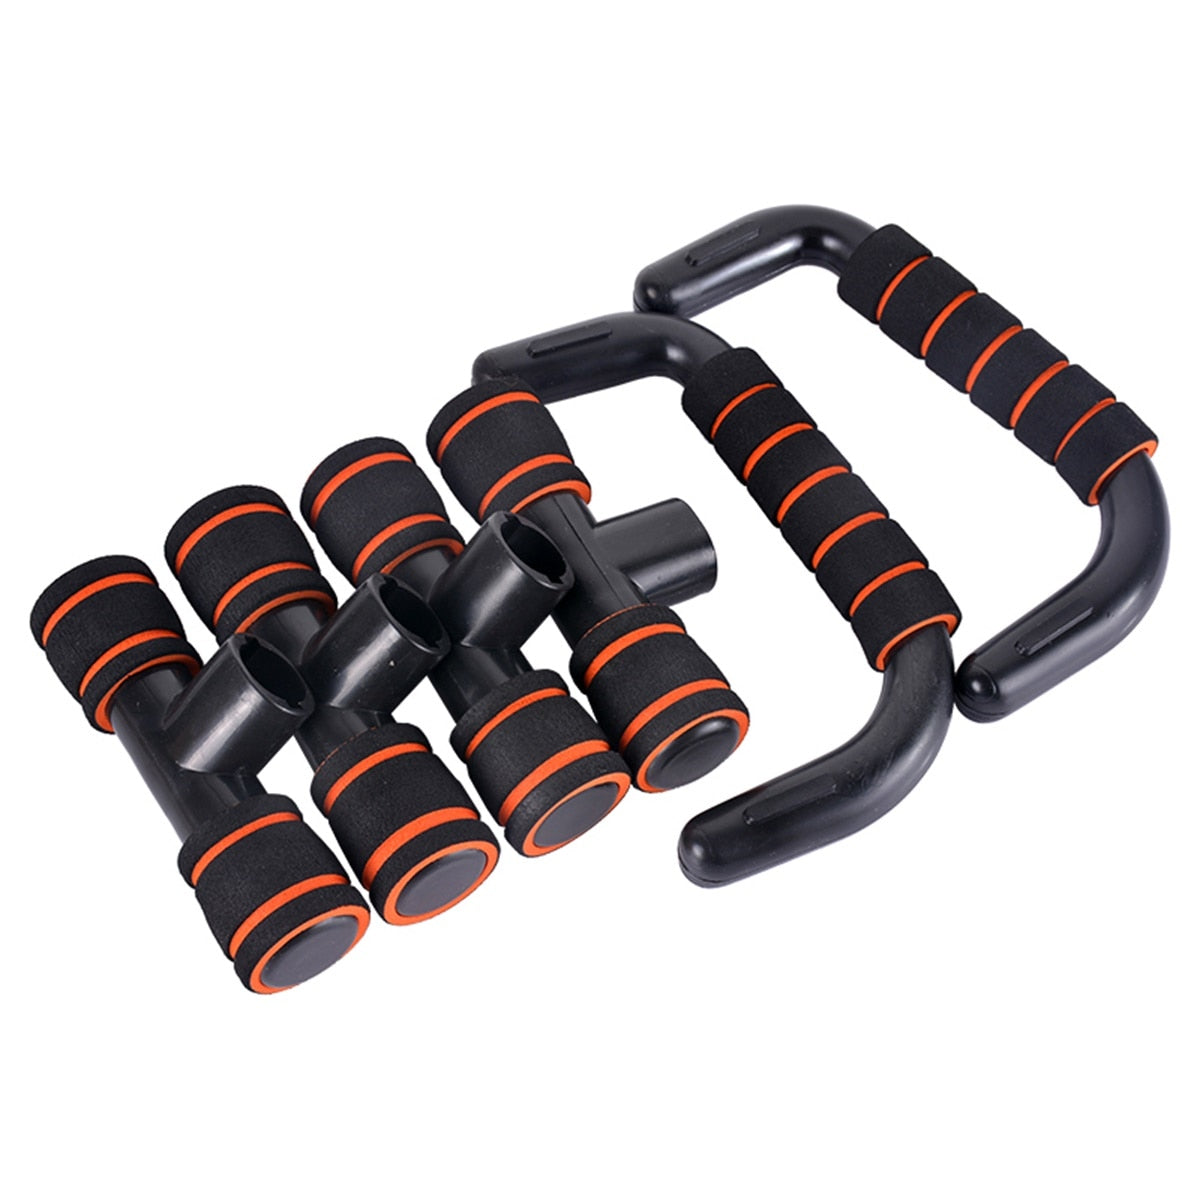 2Pcs/Set ABS Push Up Bar Body Fitness Training Tool Push-Ups Stand Bars Chest Muscle Exercise Sponge Hand Grip Holder Trainer - TRIPLE AAA Fashion Collection